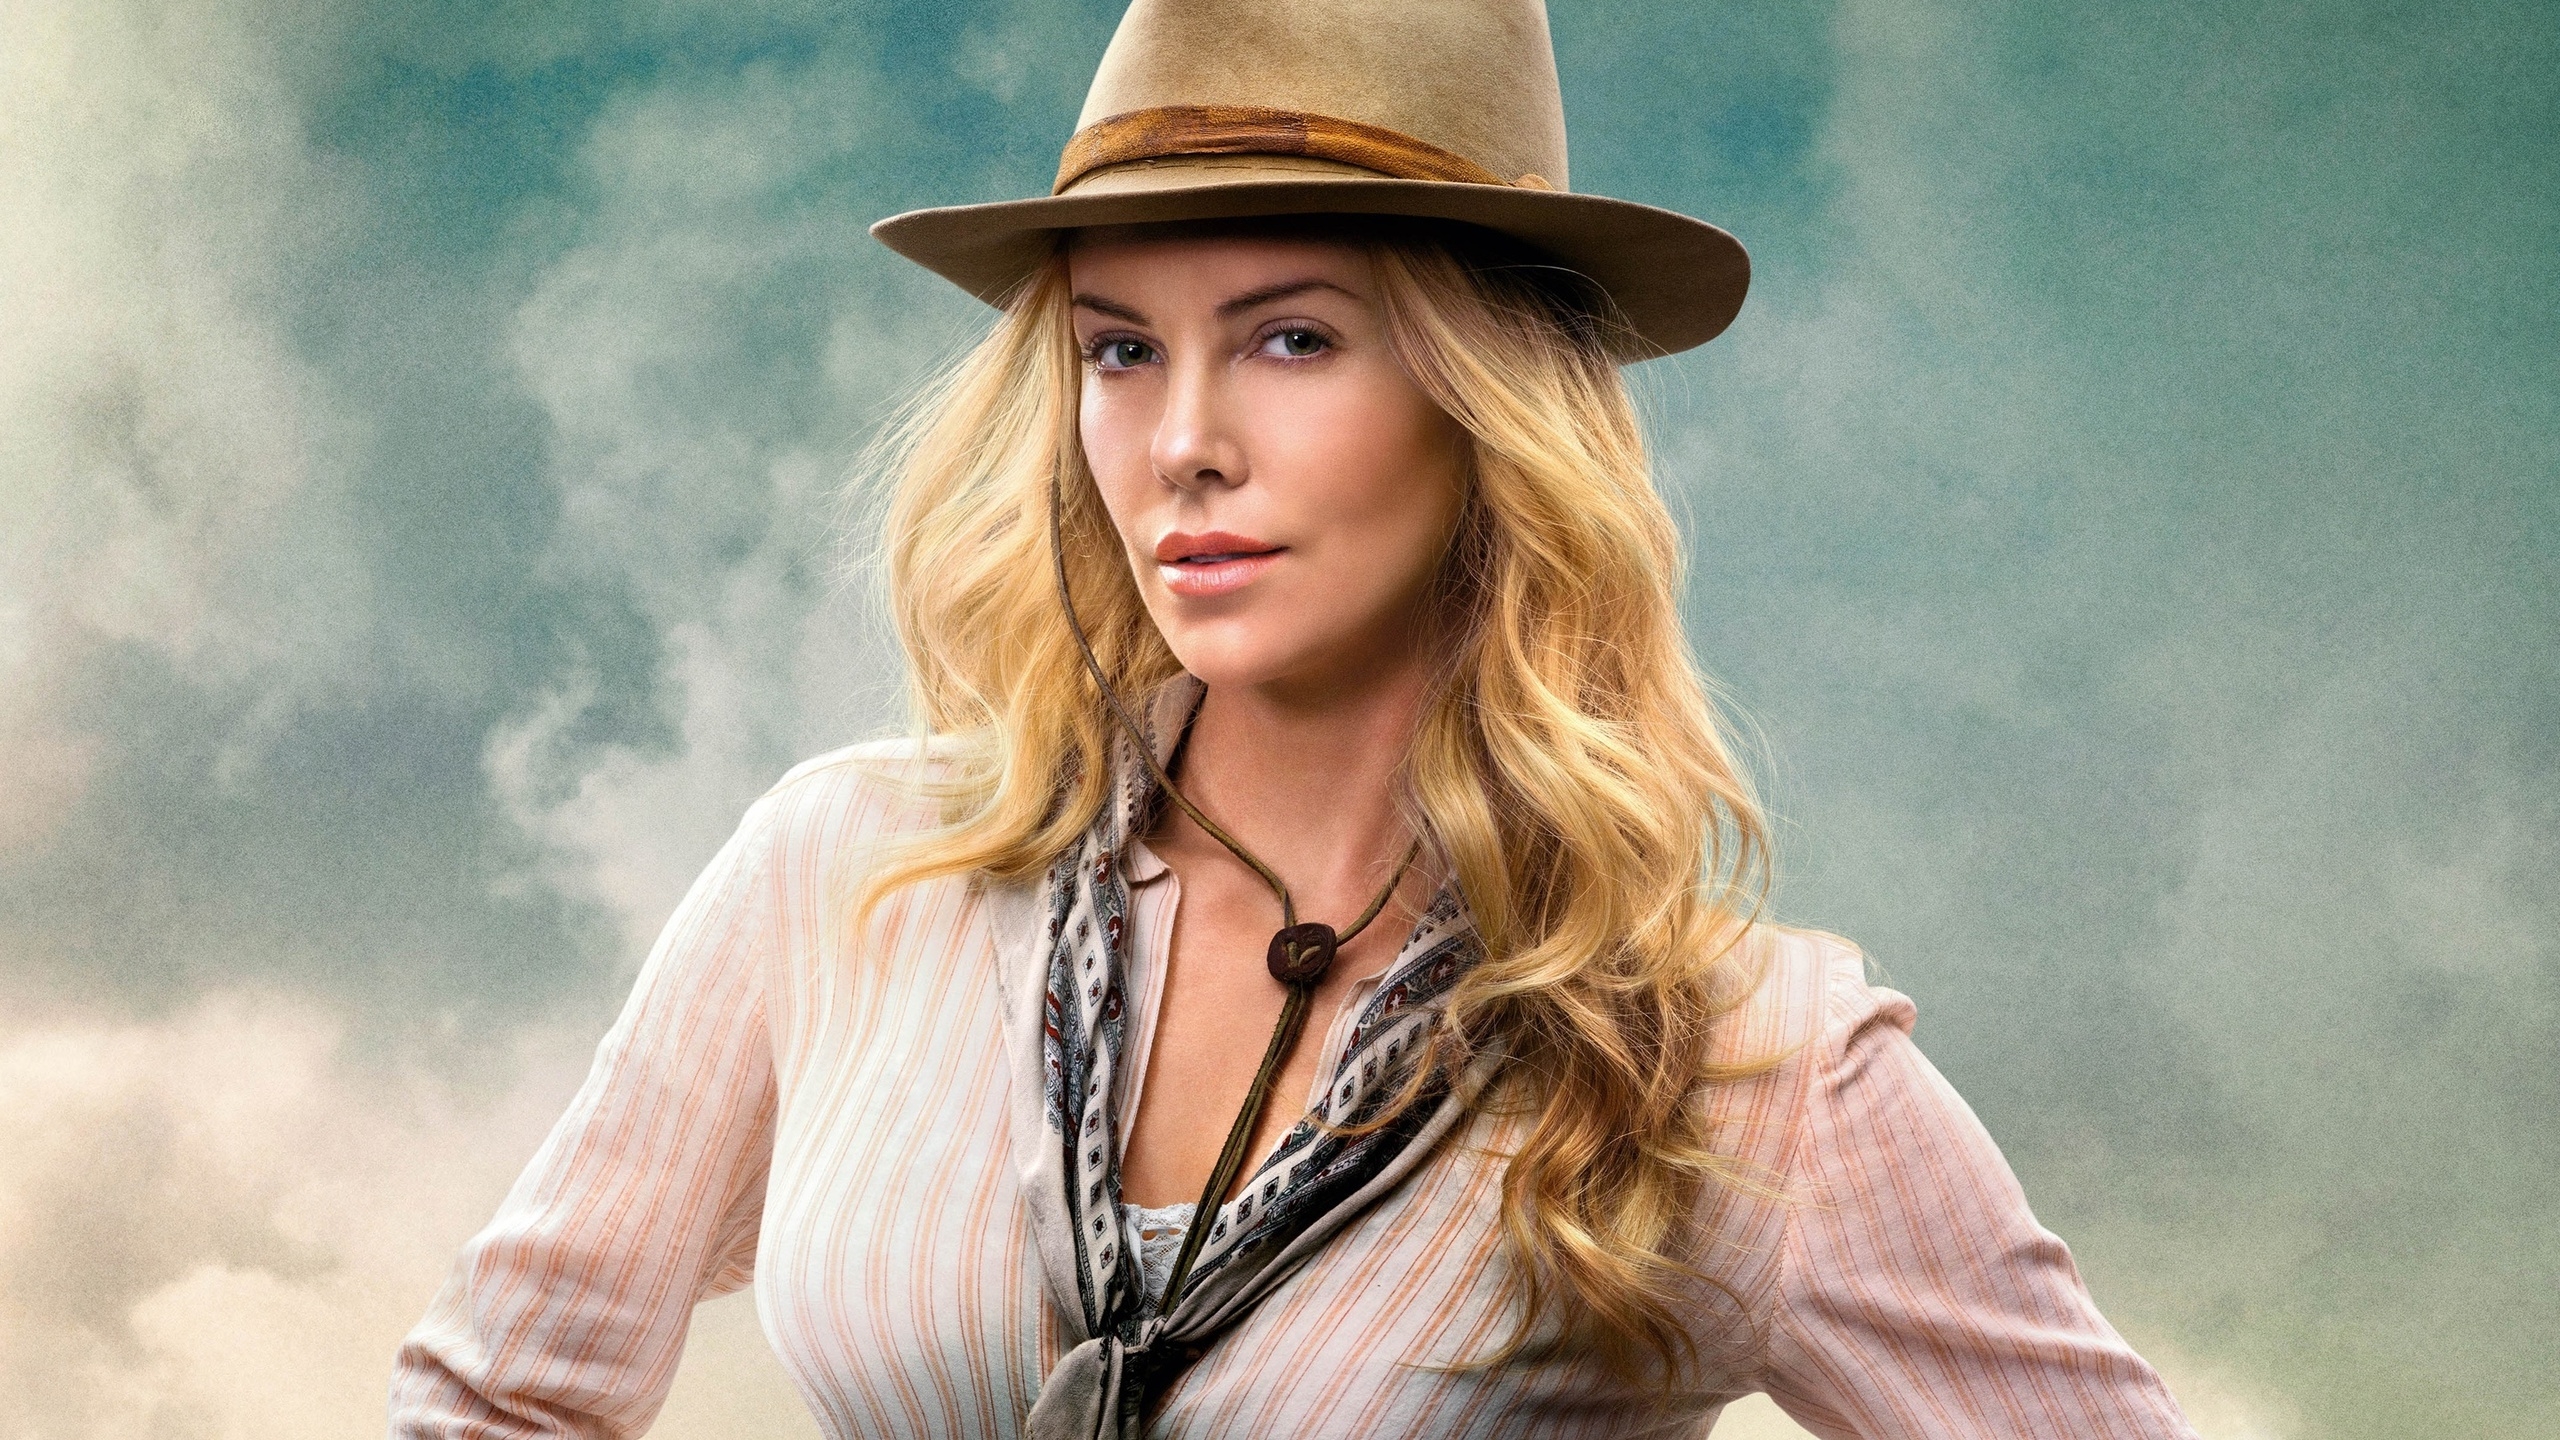 Charlize Theron in A Million Ways to Die in the West for 2560x1440 HDTV resolution